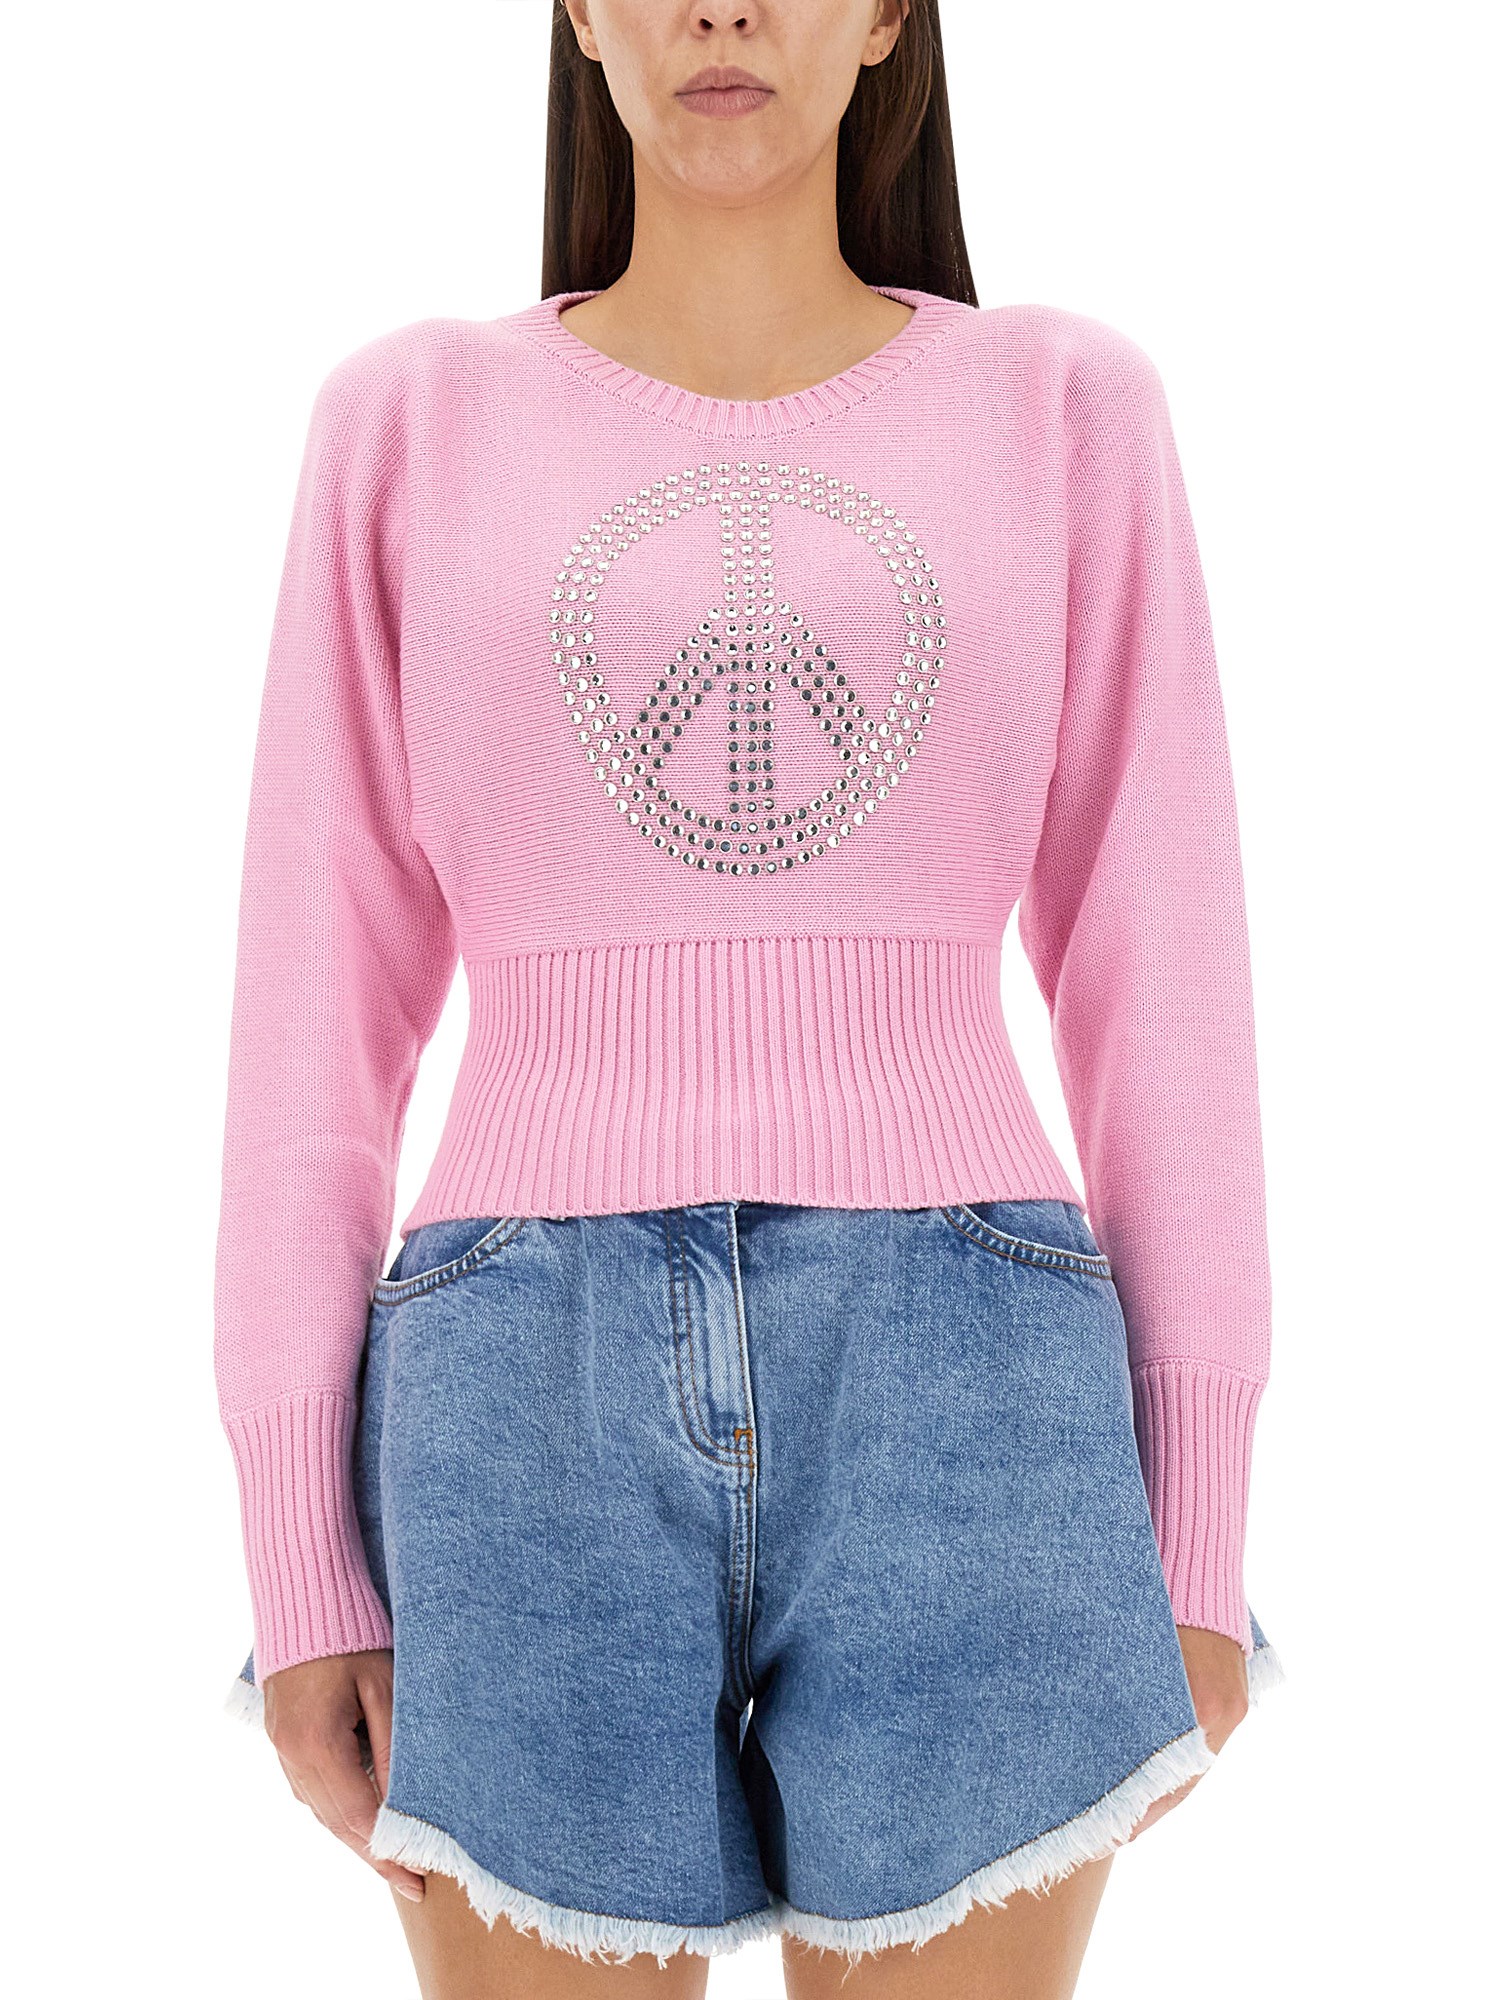 moschino jeans peace symbol jersey